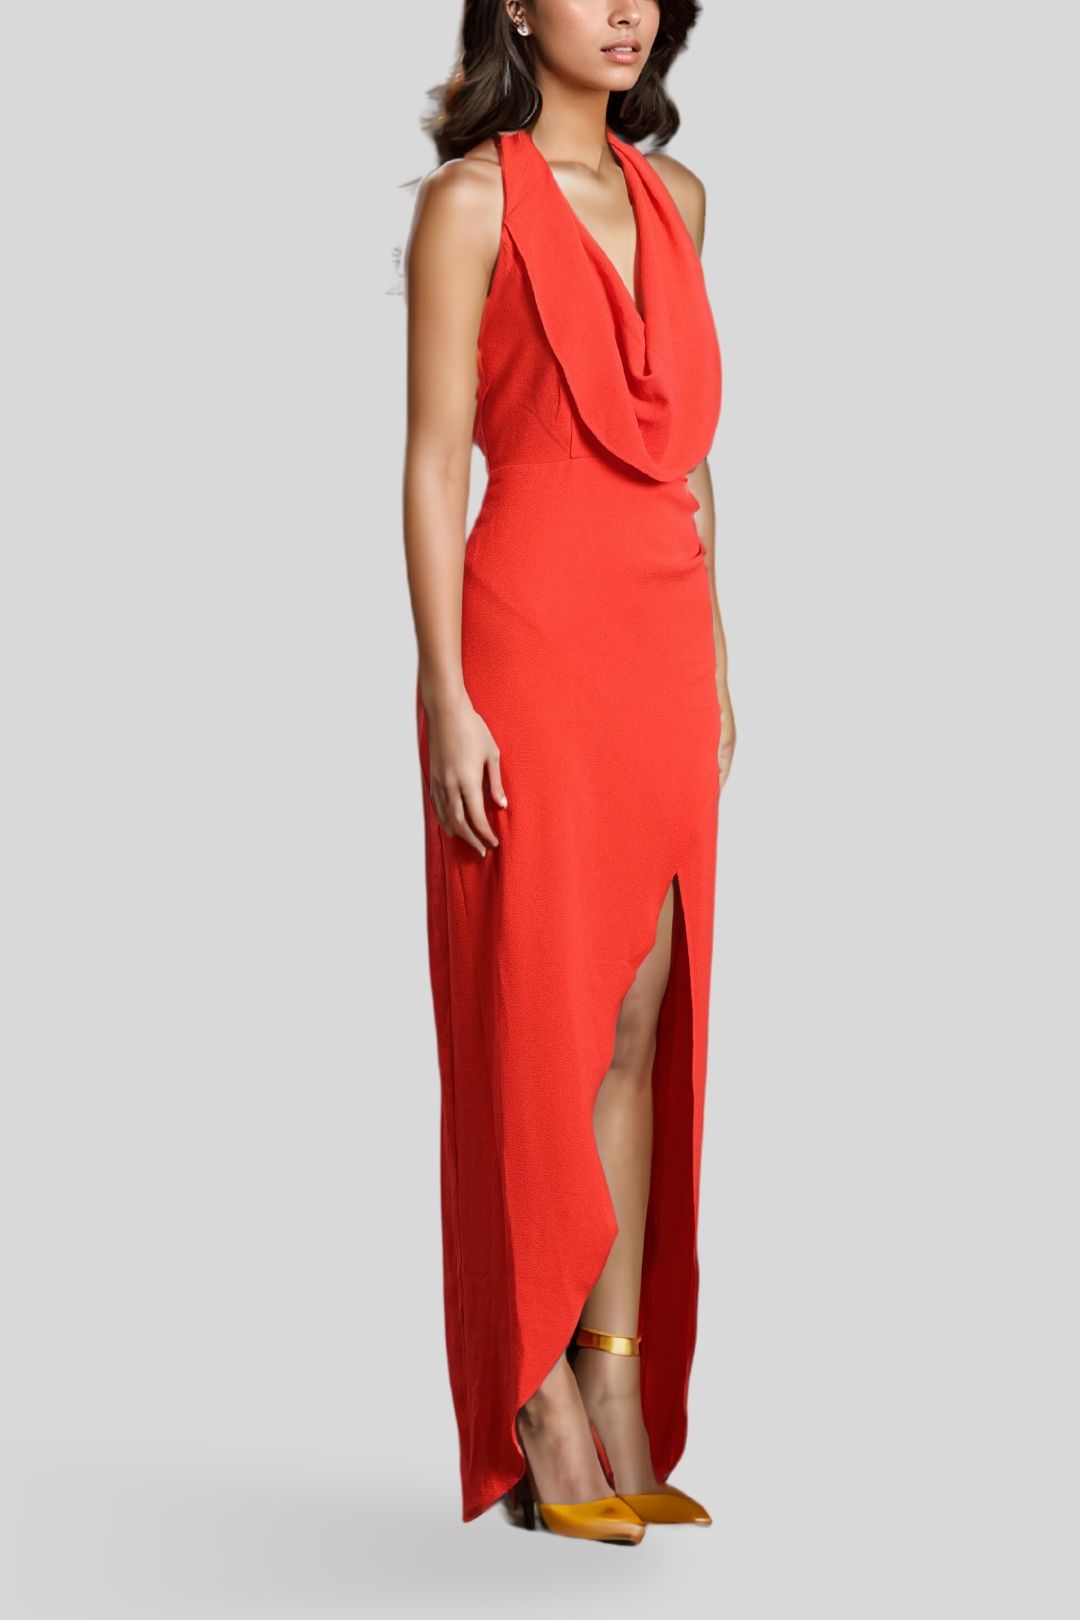 Nookie Amore Gown Red Backless